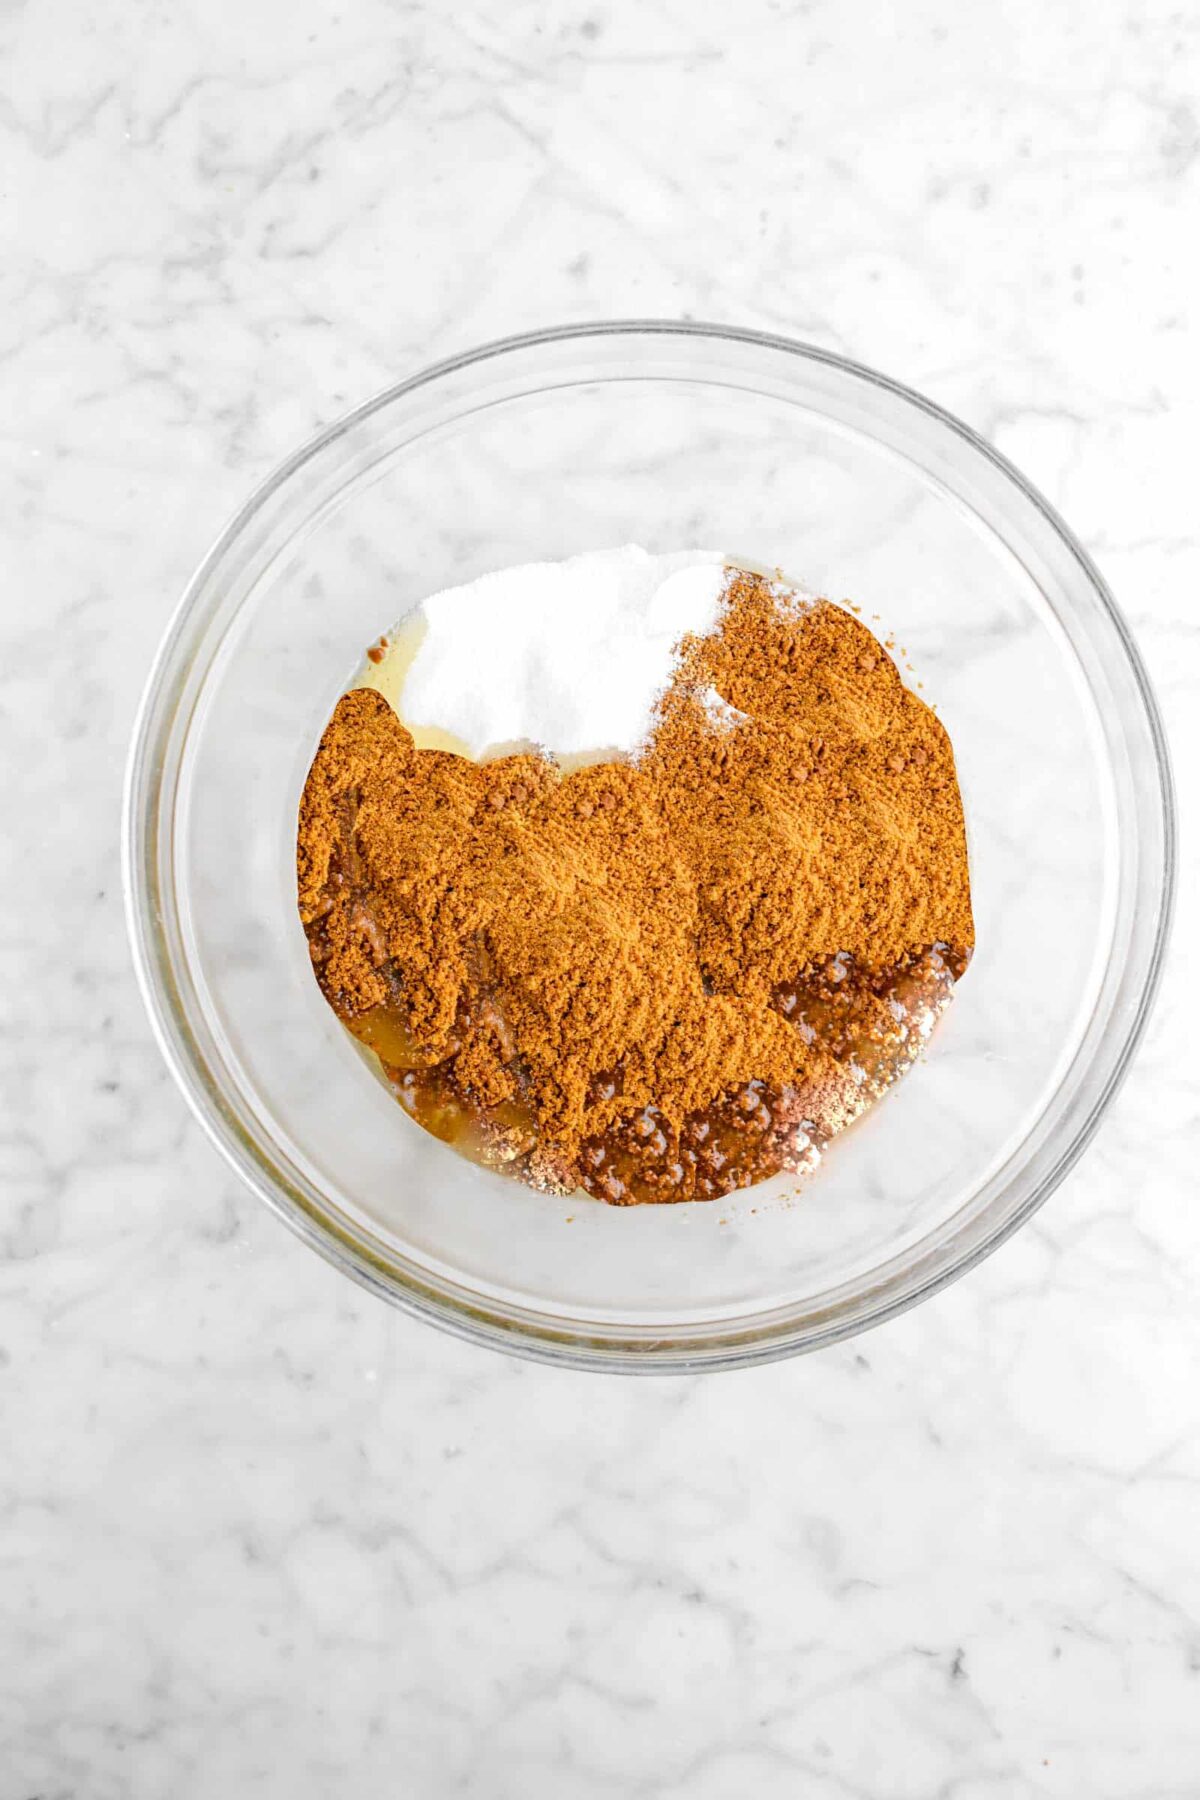 sugar, gingerbread cookie crumbs, and butter in glass bowl